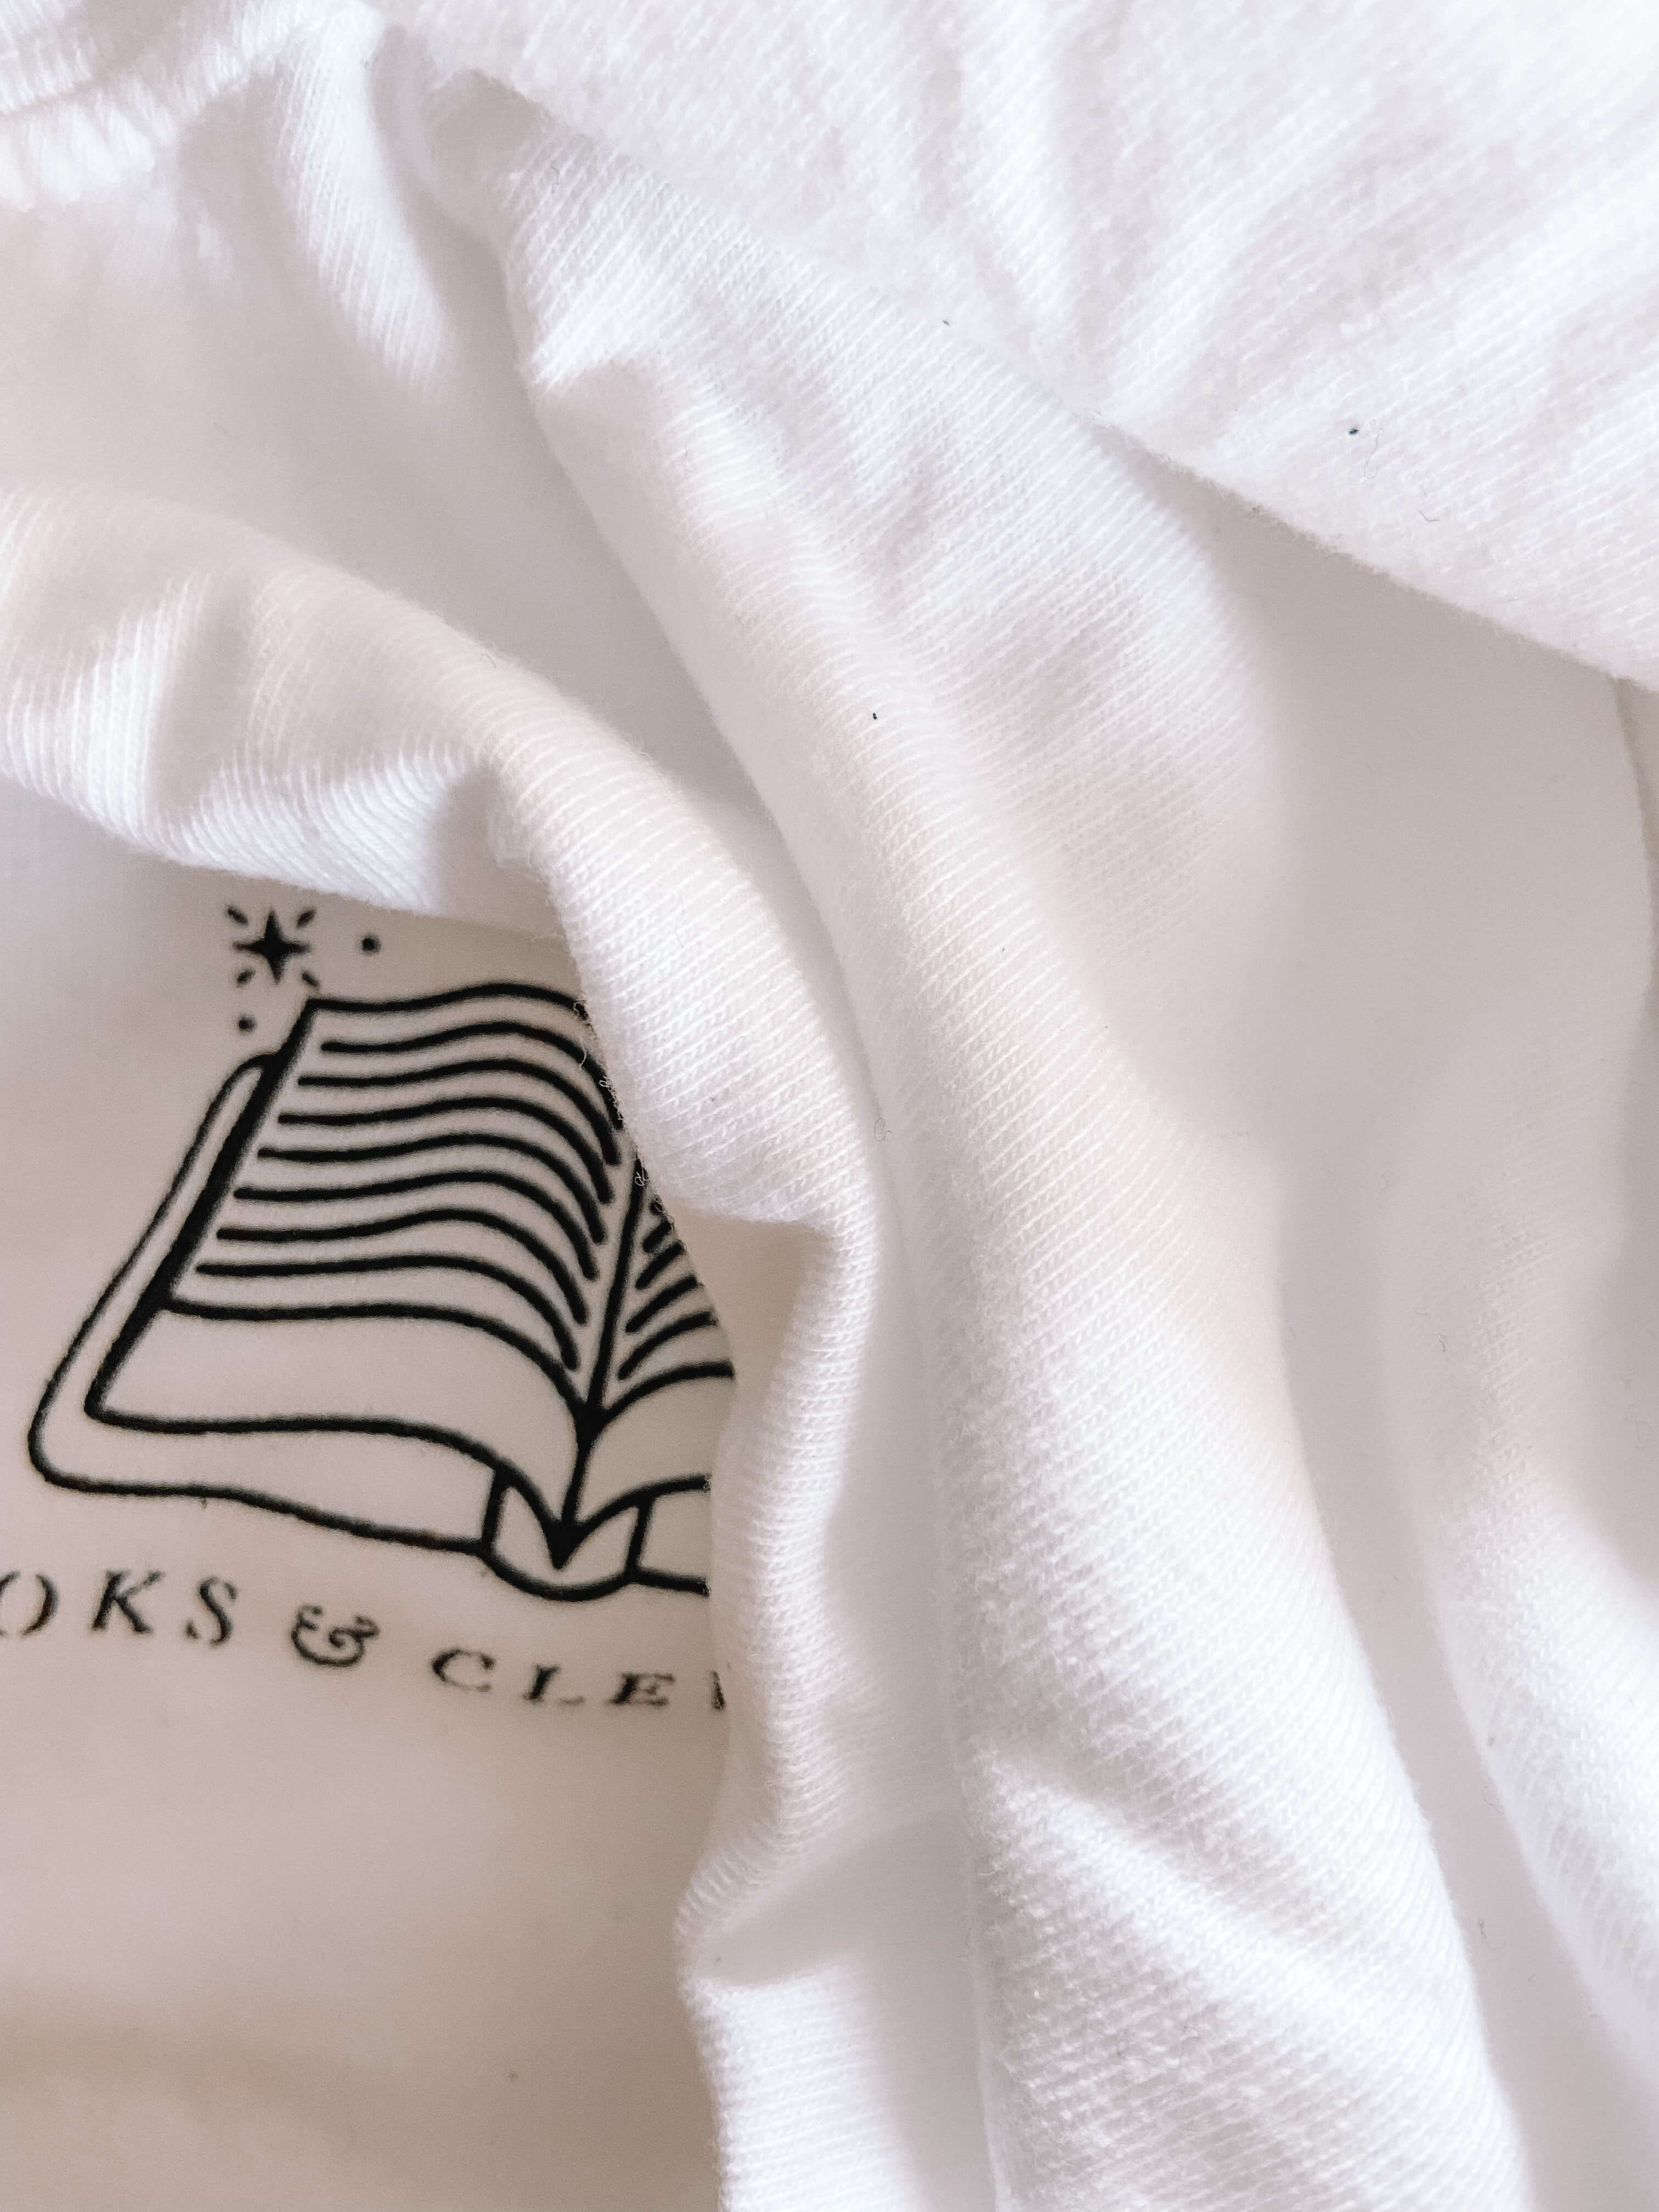 Closeup of white tee shirt with black logo that reads "Books and Cleverness" with art of an open book above it. 